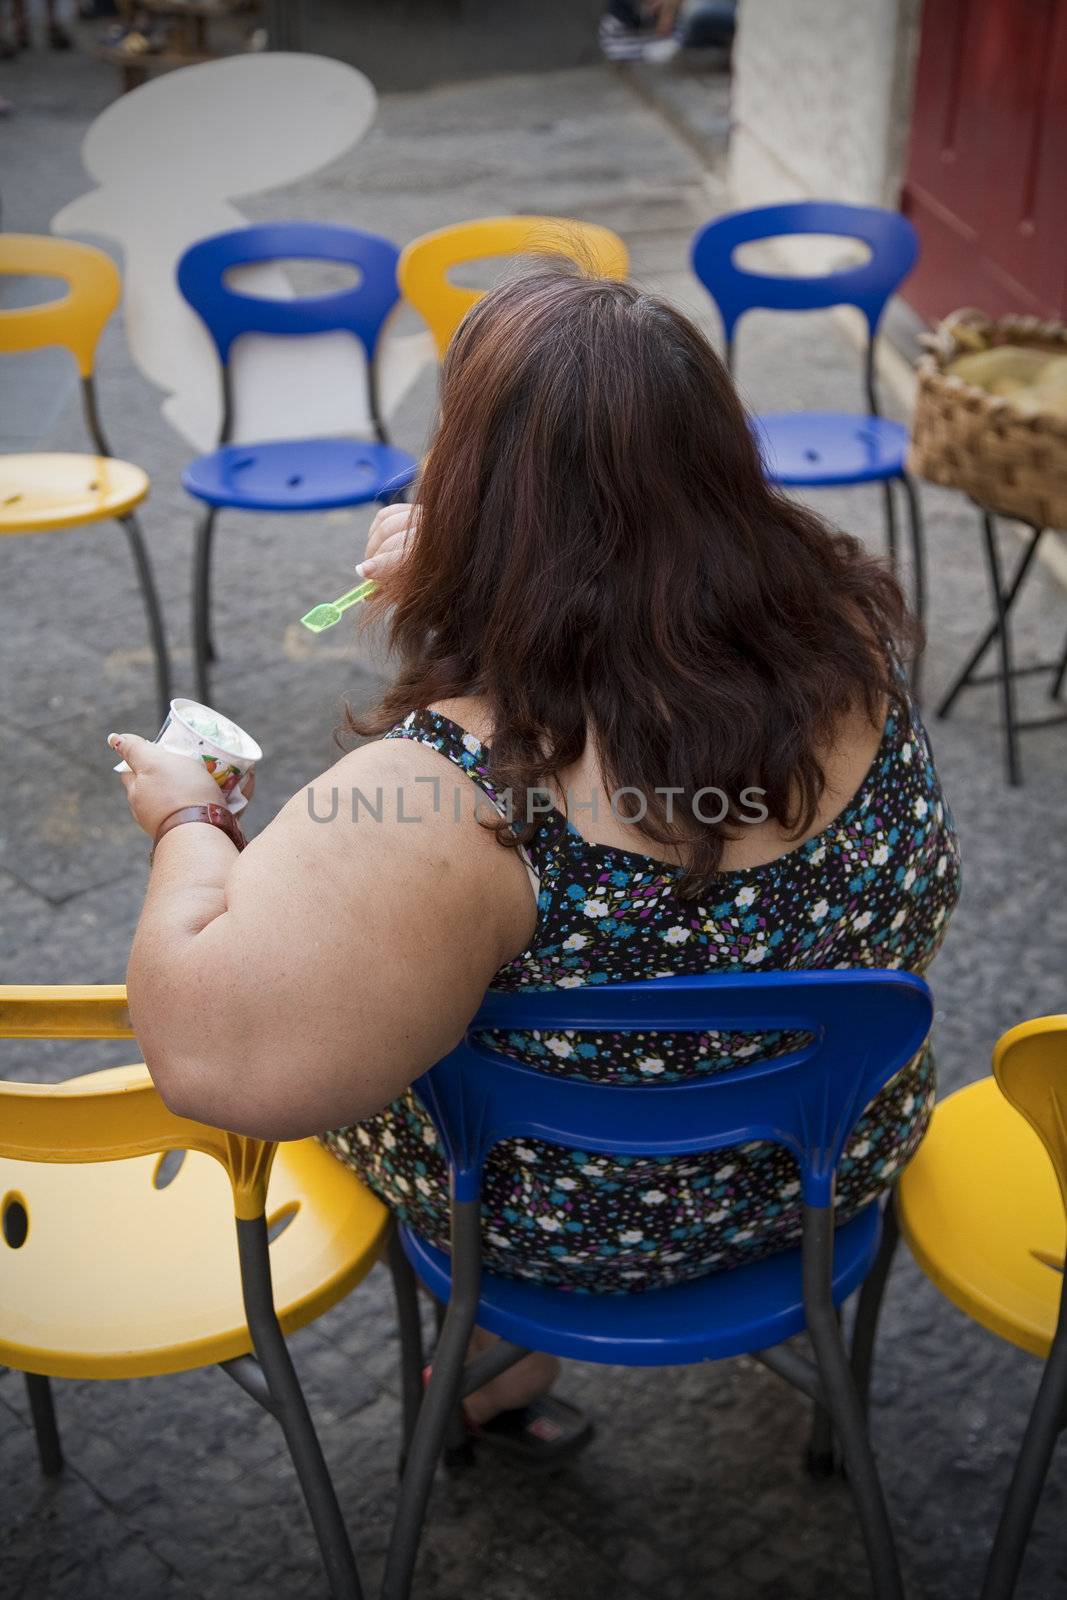 Adult overweight female sitting outdoors eating an icecream.